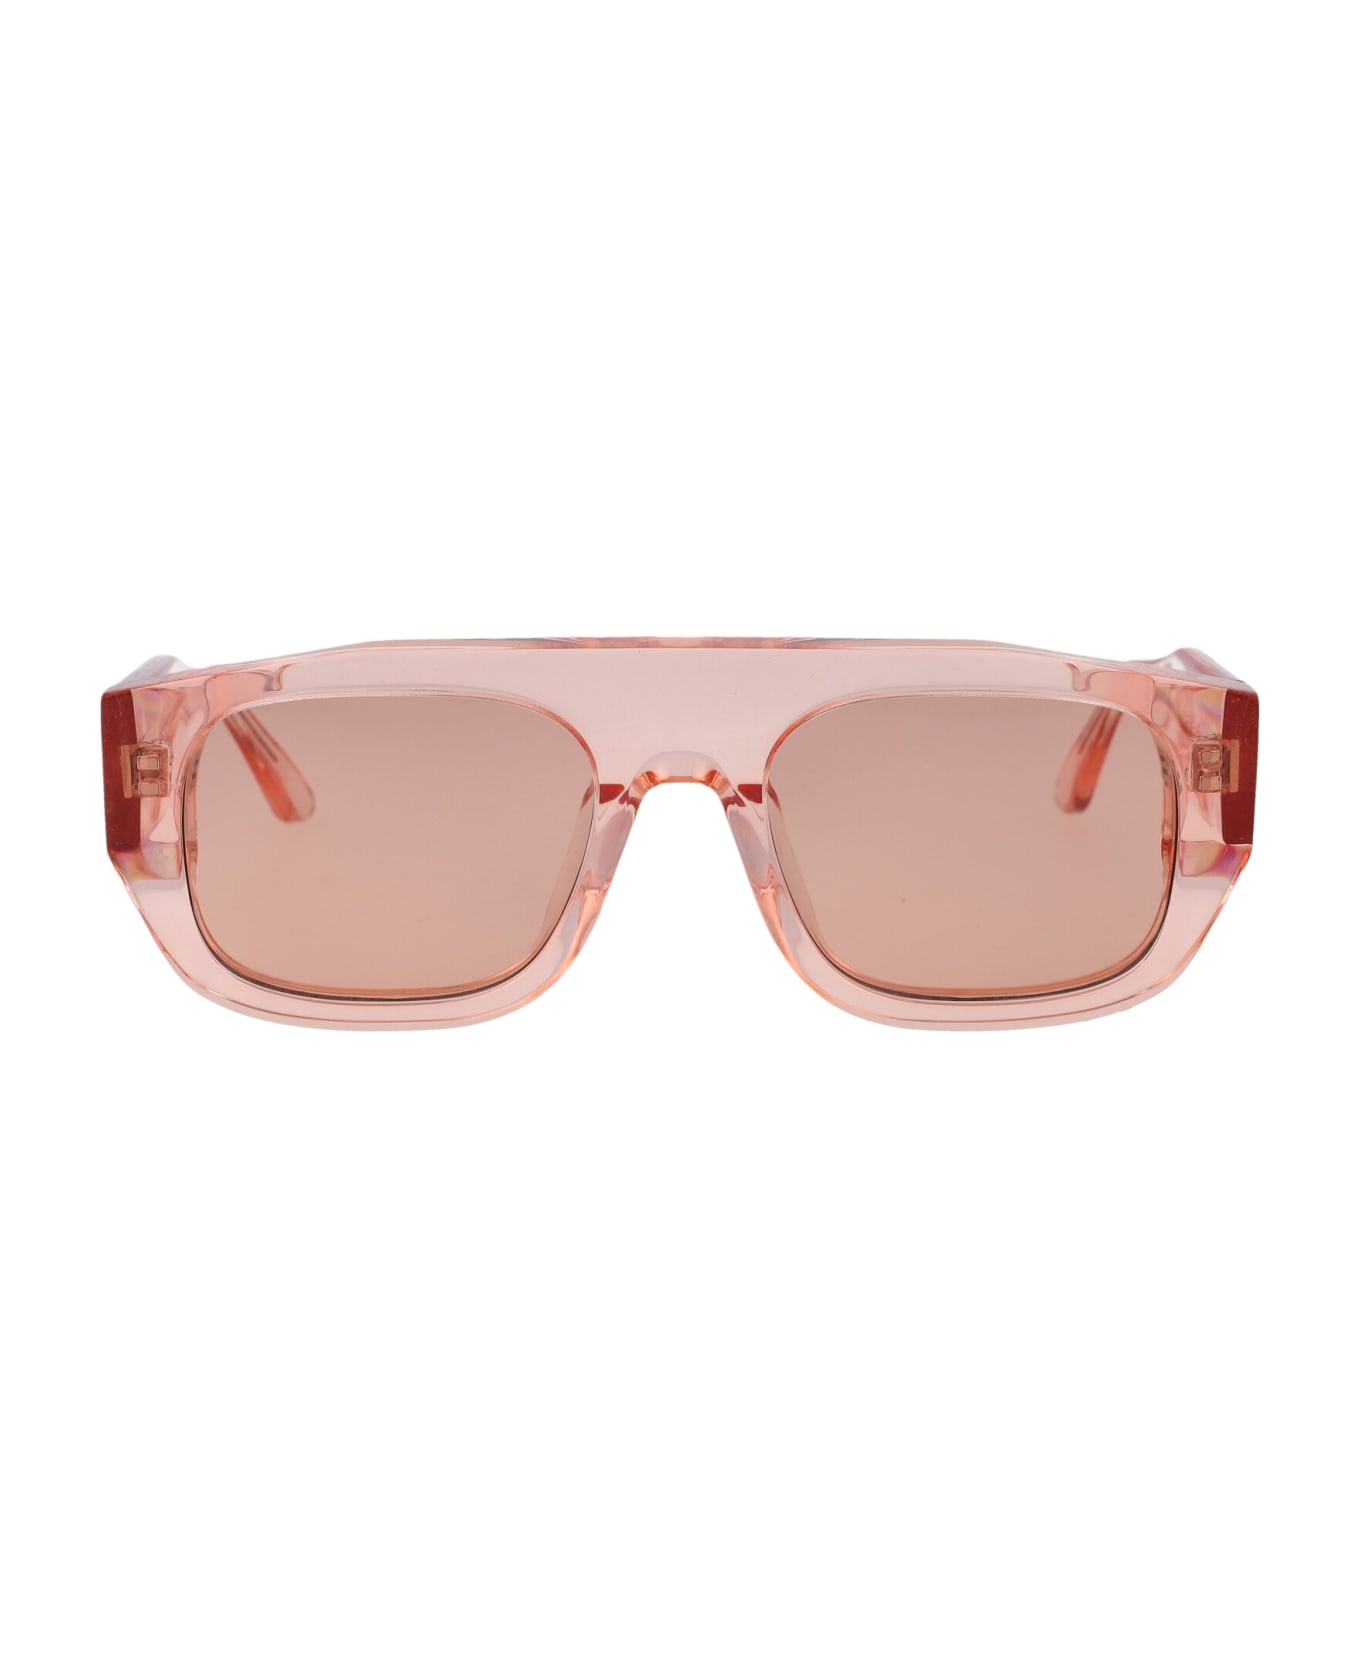 Thierry Lasry Monarchy Sunglasses - 1654 PINK